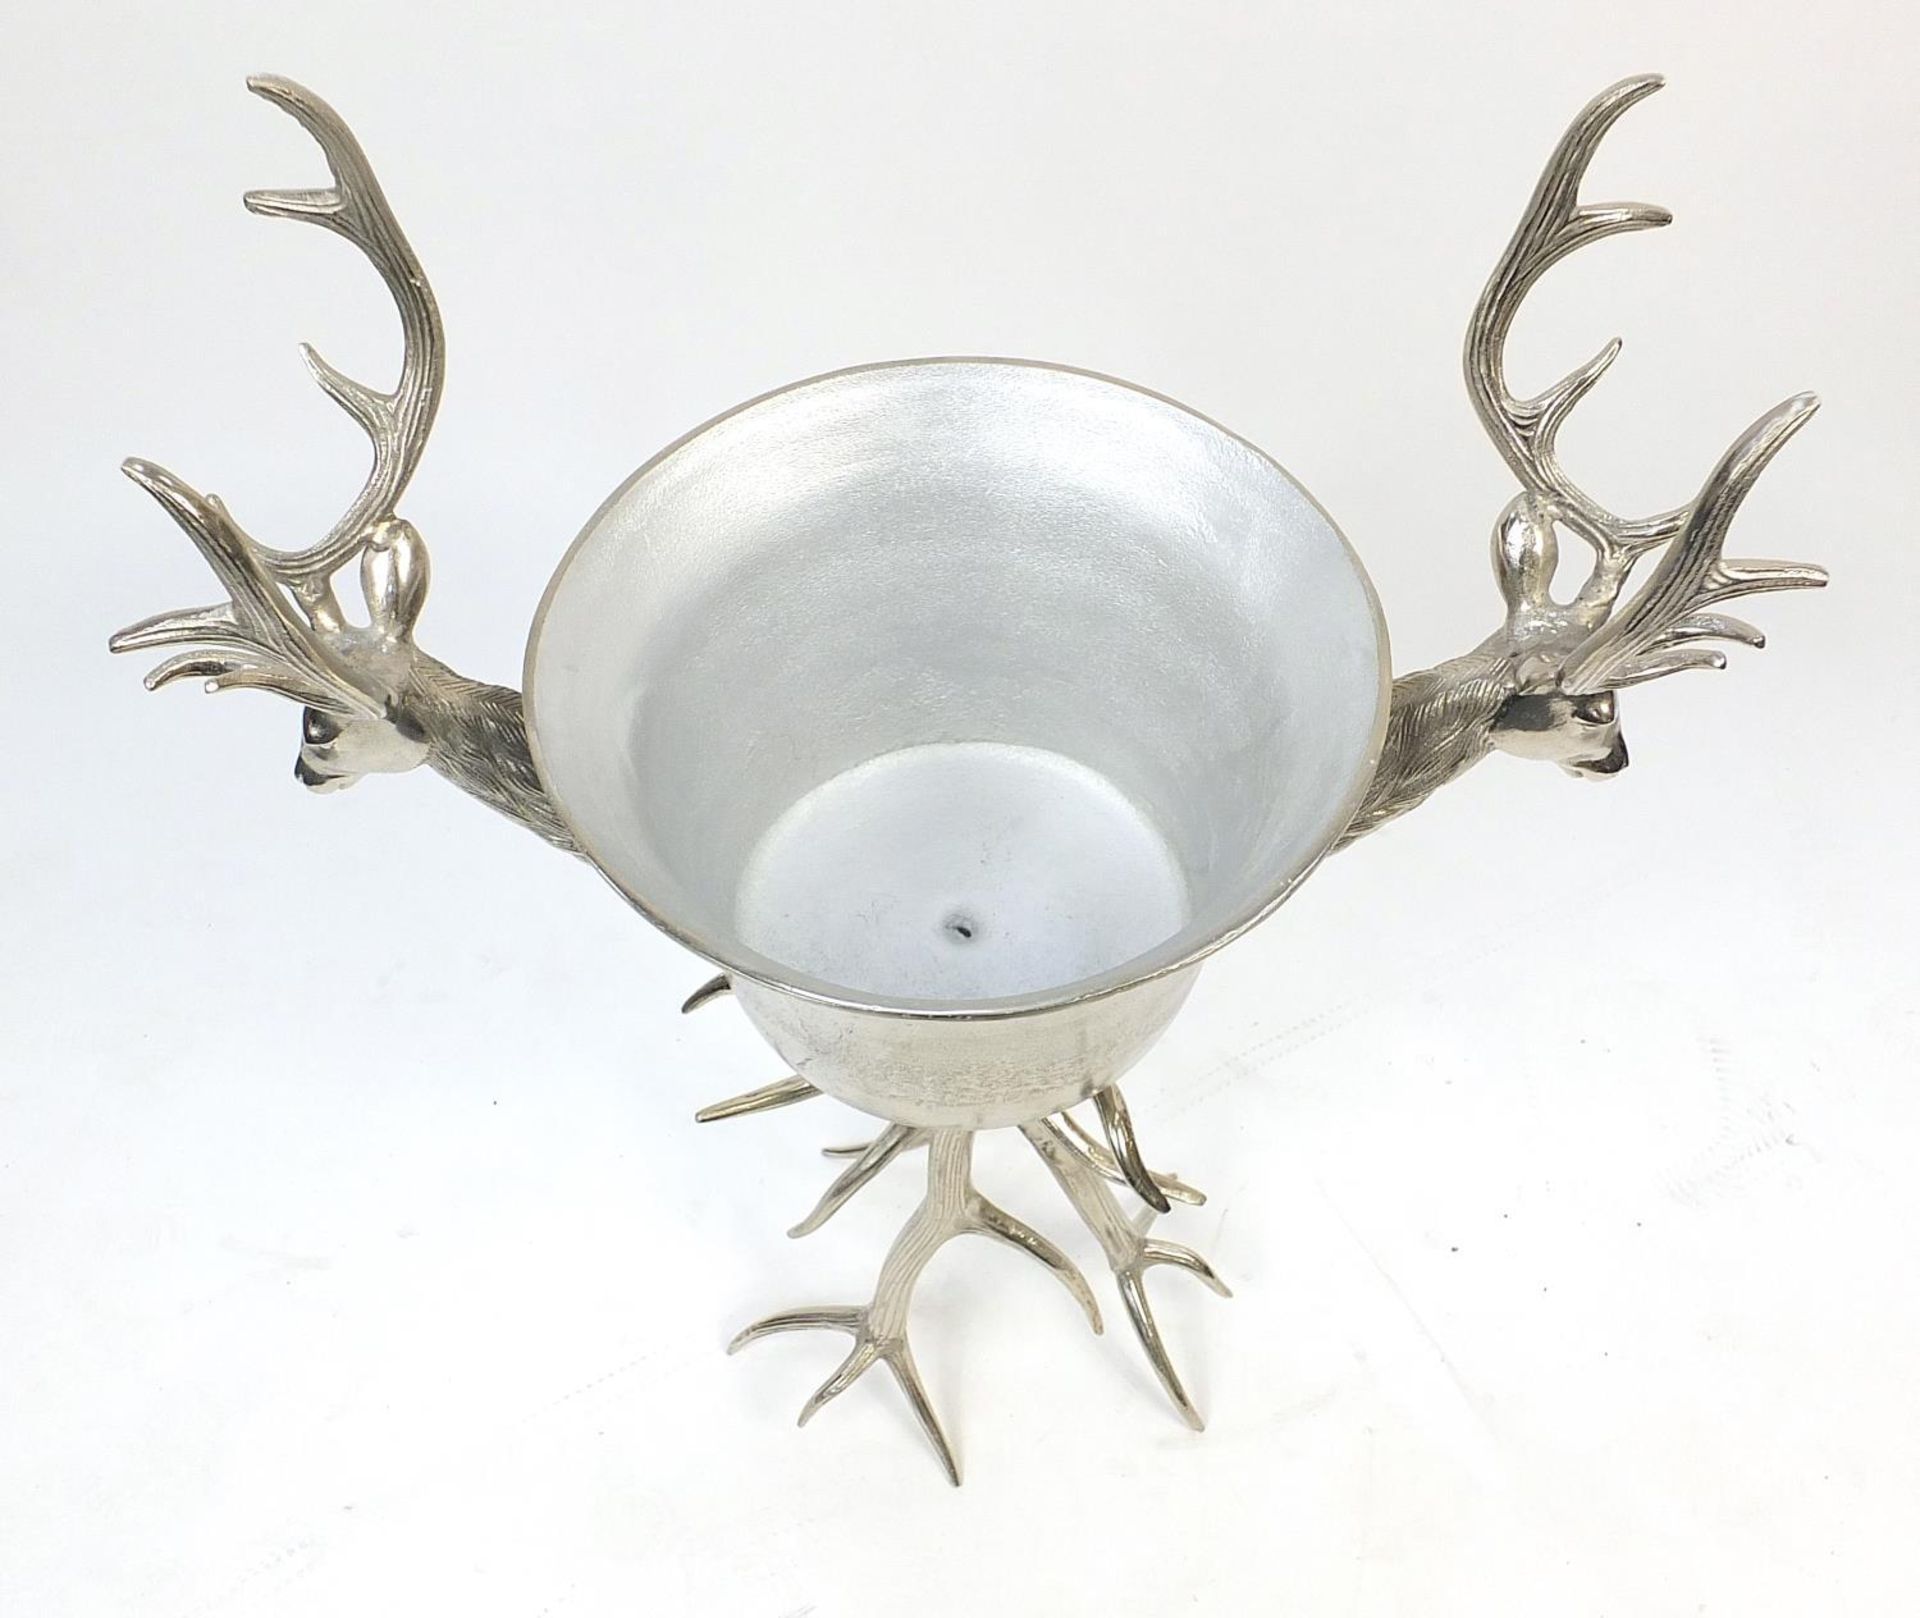 Silvered staghorn design floor standing ice bucket with stag's heads, 104.5 high x 70cm wide : - Image 3 of 4